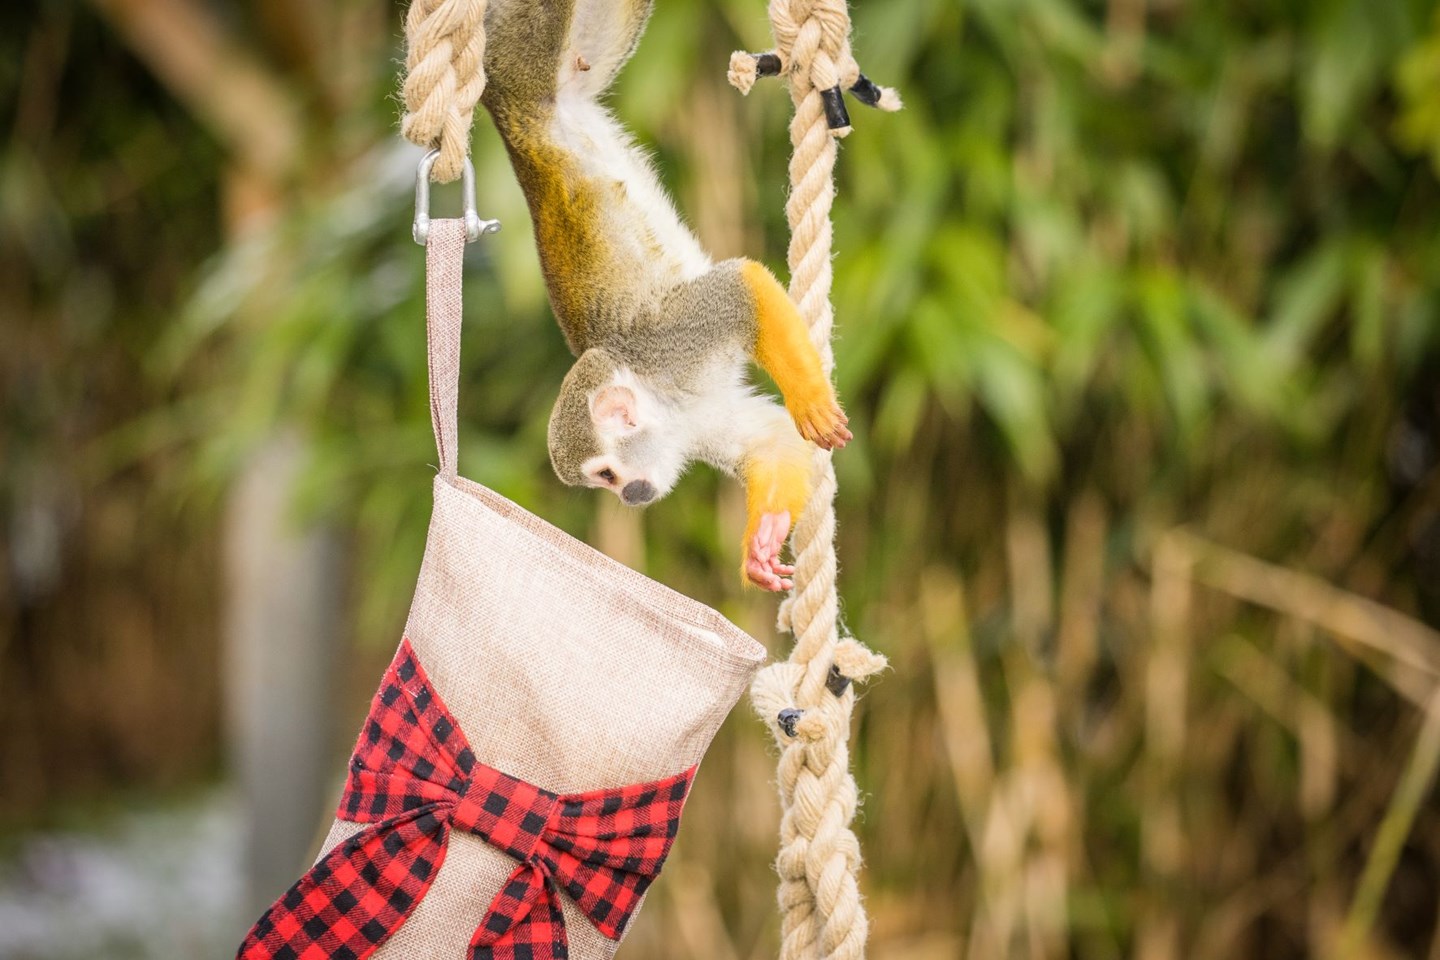 Squirrel monkey hangs upside down to look inside a Christmas stocking